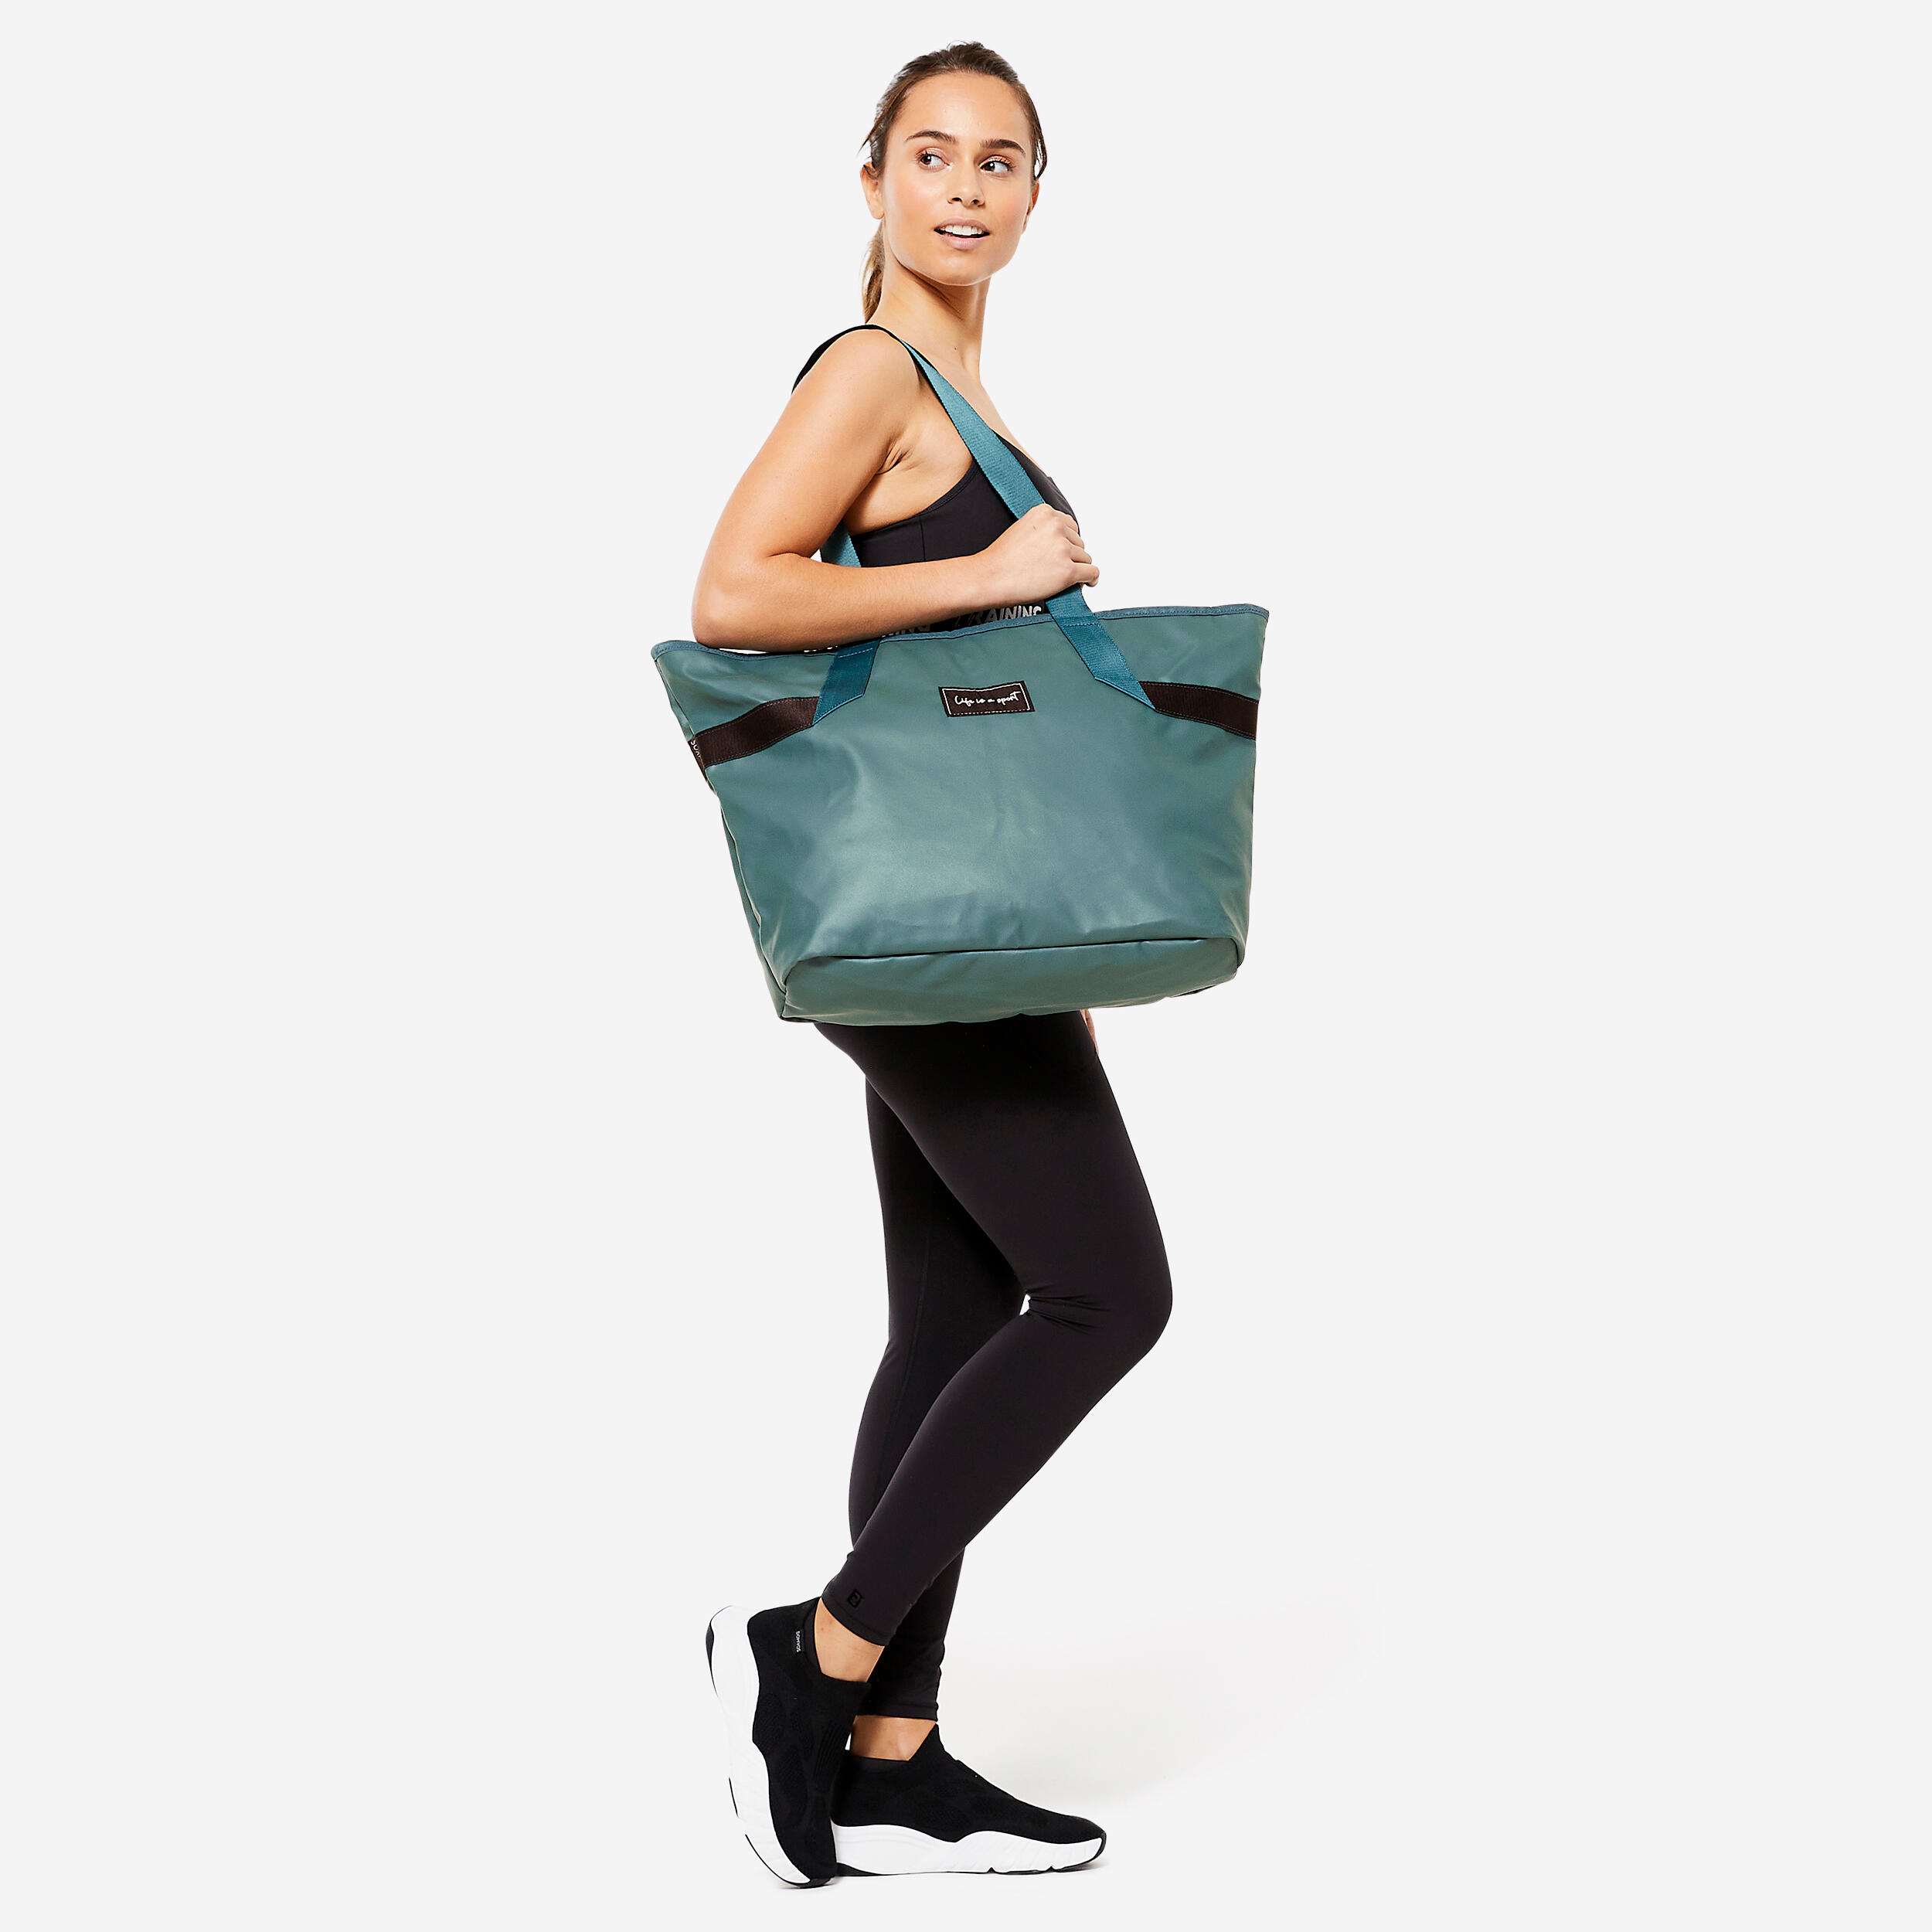 Women's 25 L Bag with Pockets - Turquoise 3/9